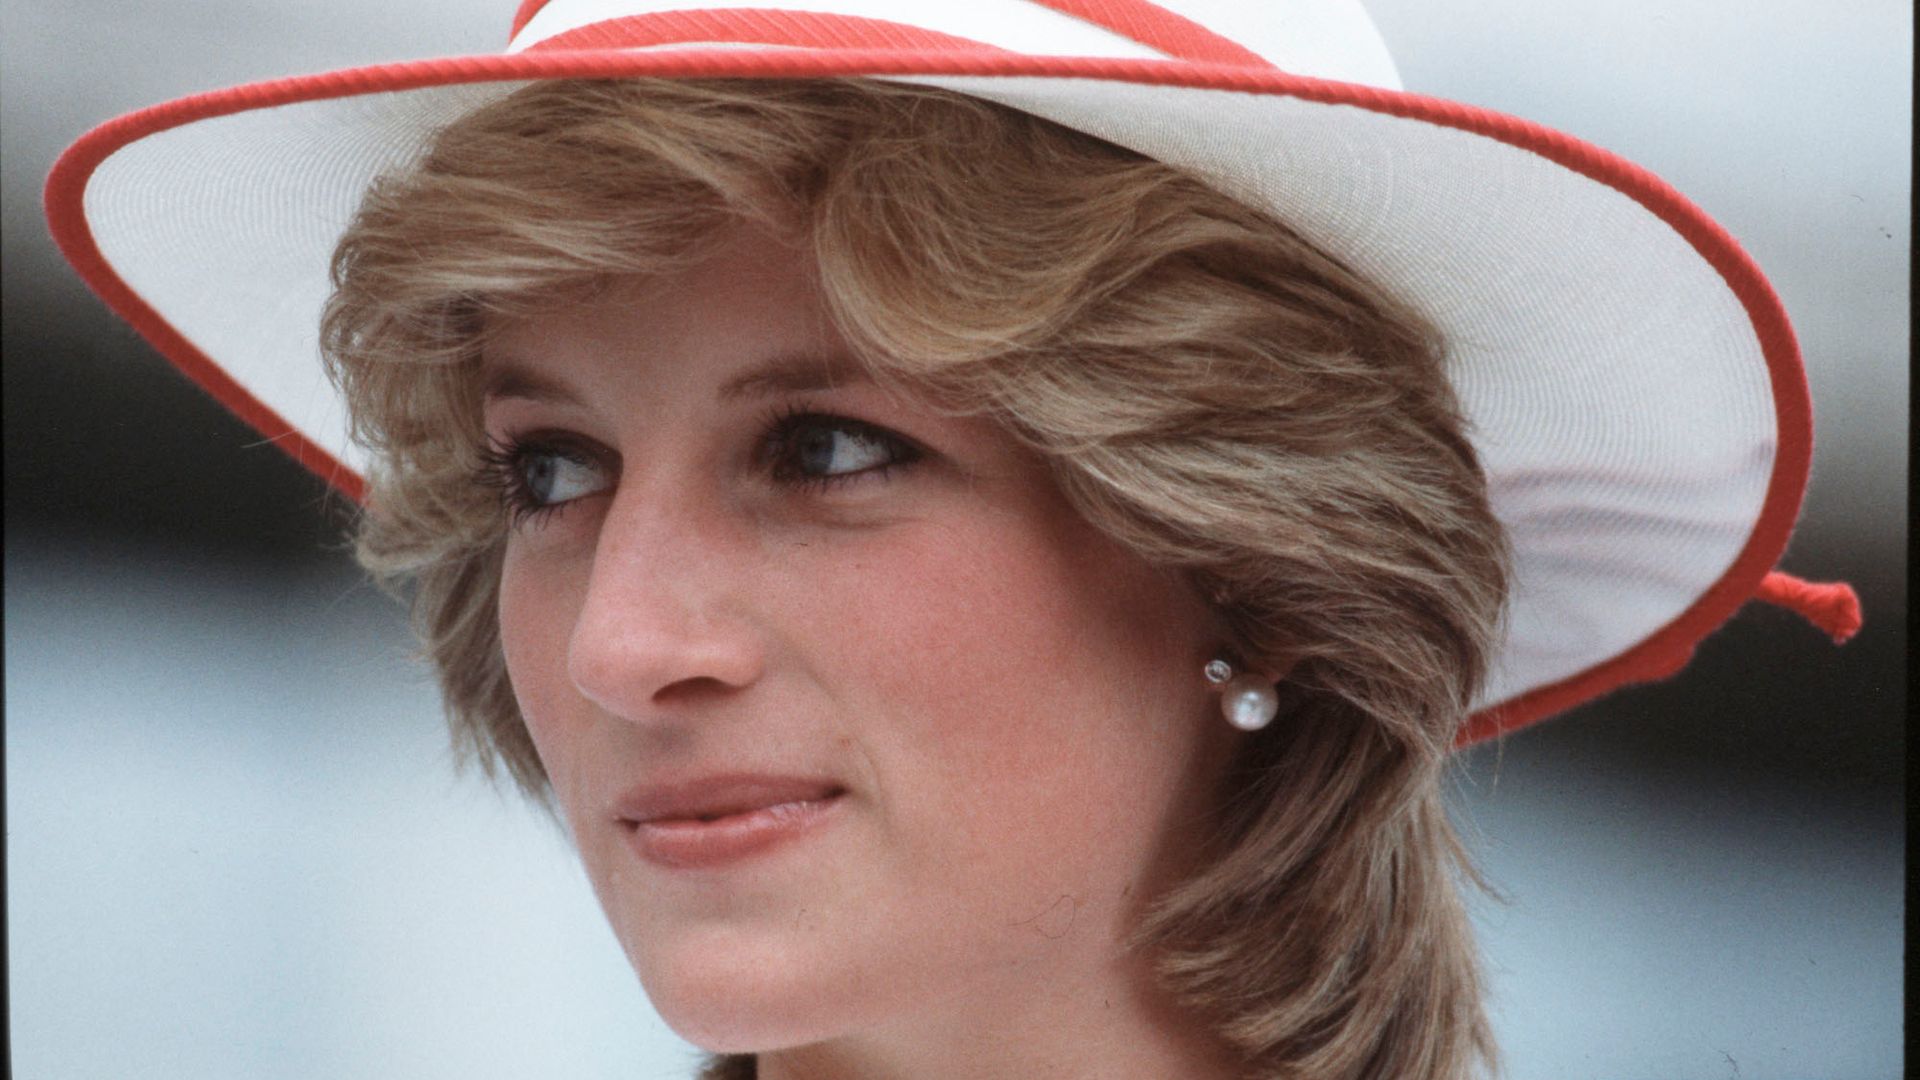 Princess Diana on Royal Tour in Canada in 1983, wearing a white and red hat and looking to one side 